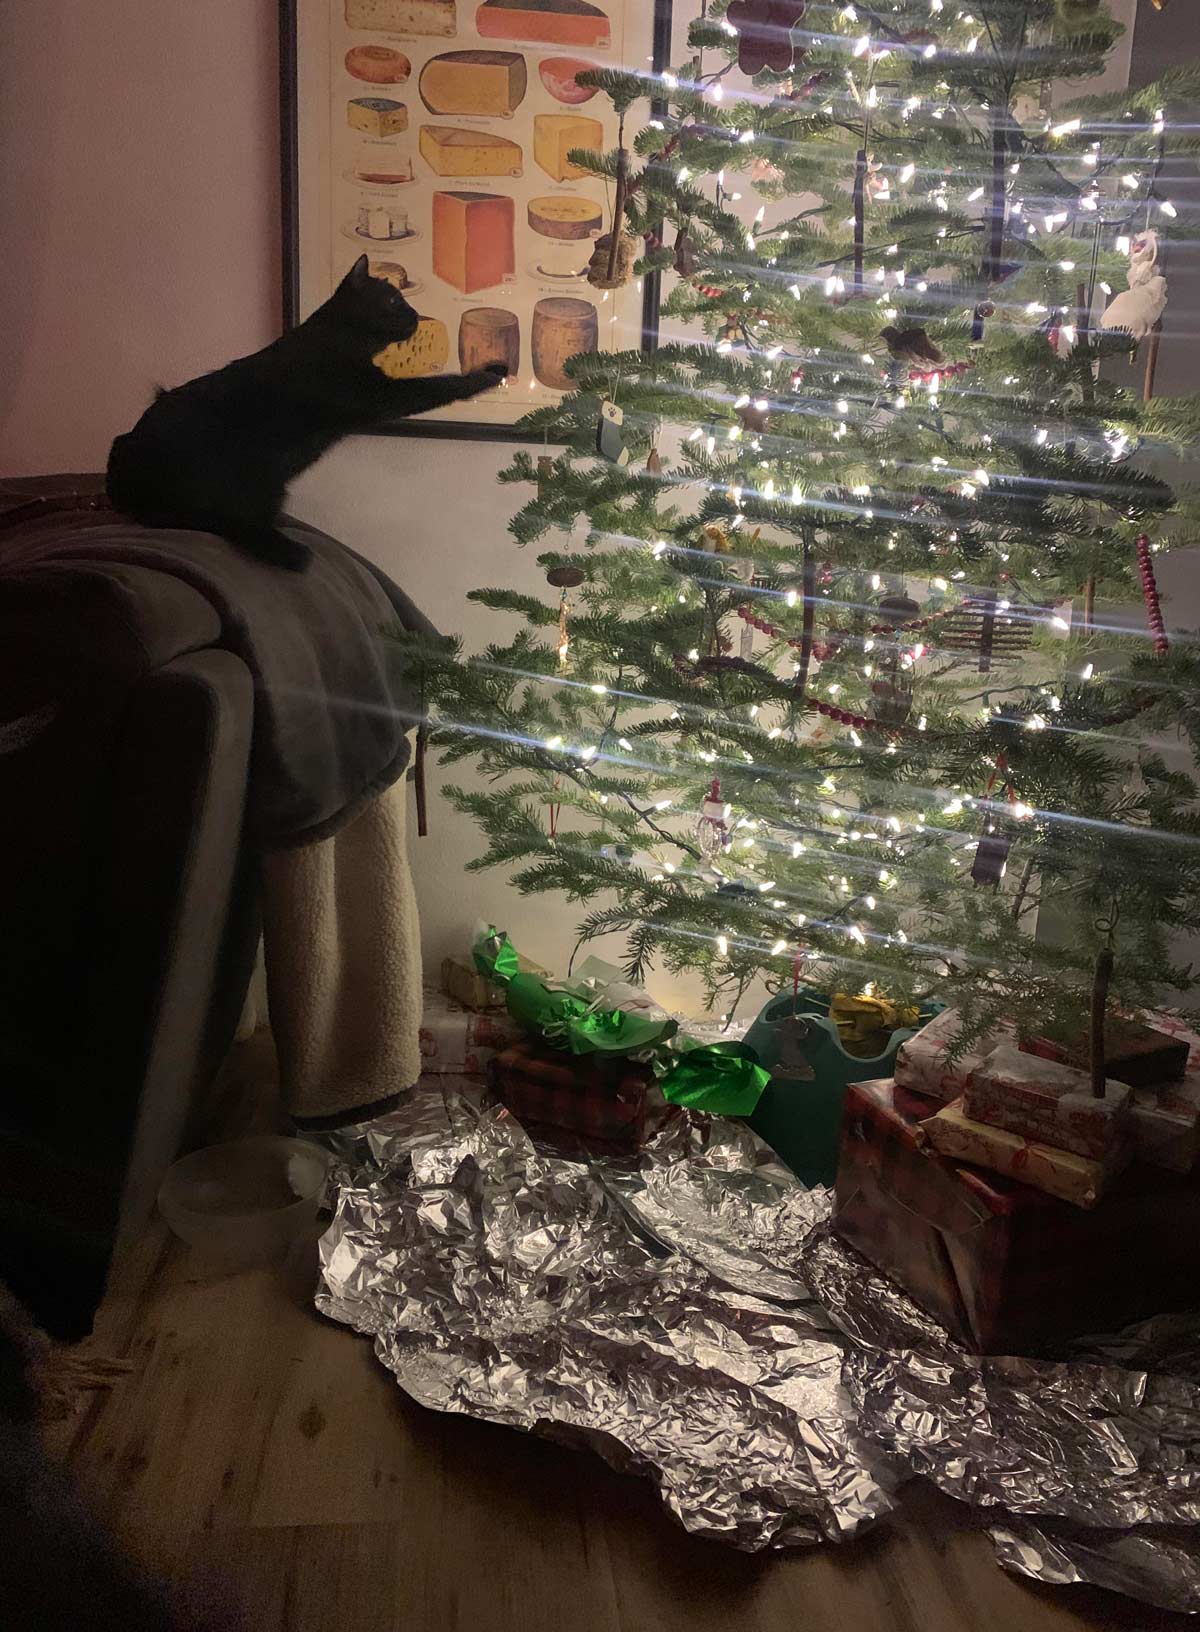 The cat is trying to circumvent the Christmas tree force field